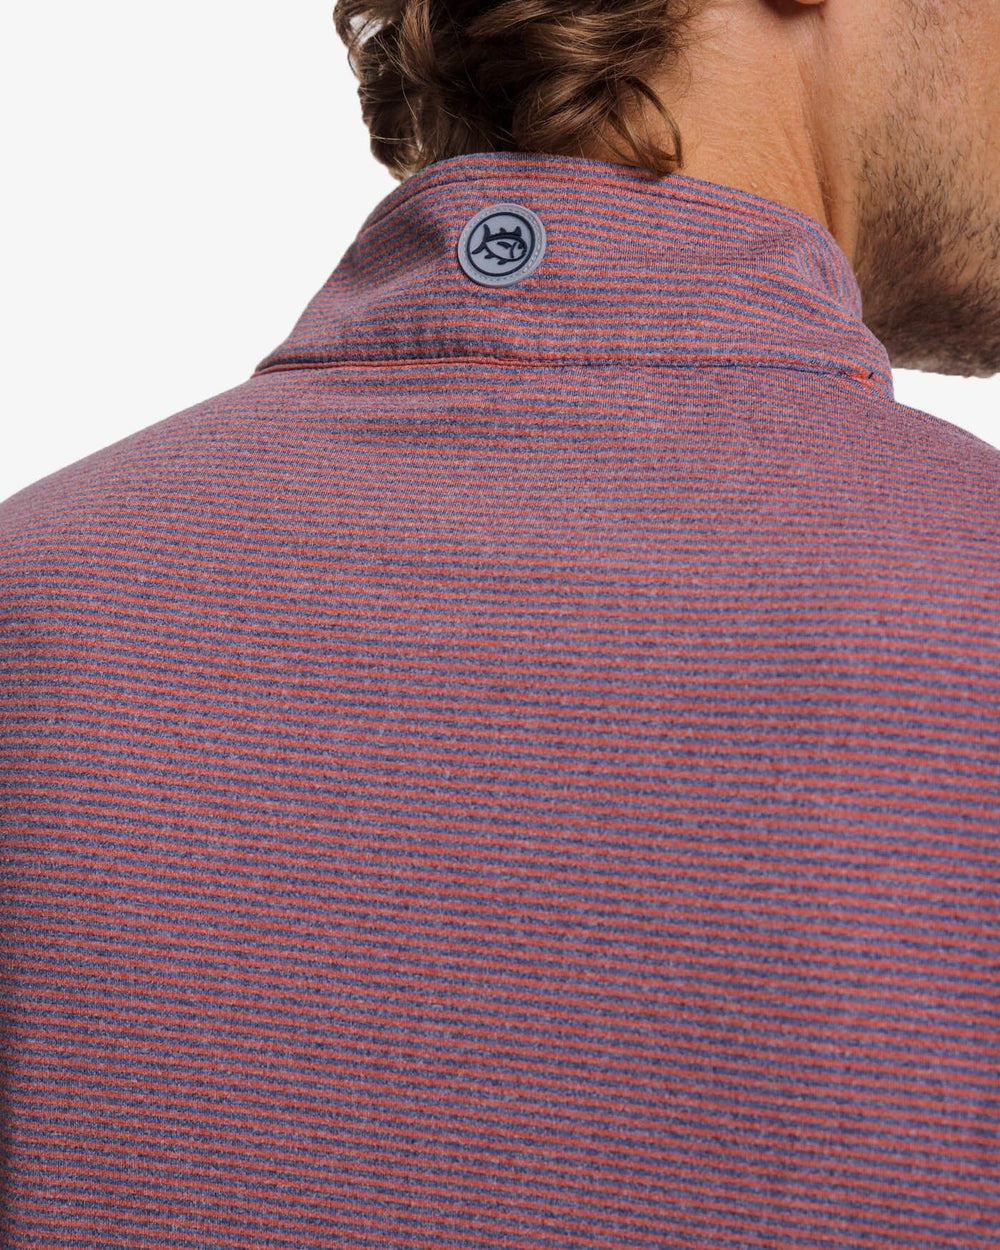 The yoke view of the Southern Tide Cruiser Heather Micro-Stripe Performance Quarter Zip Pullover by Southern Tide - Heather Dusty Coral